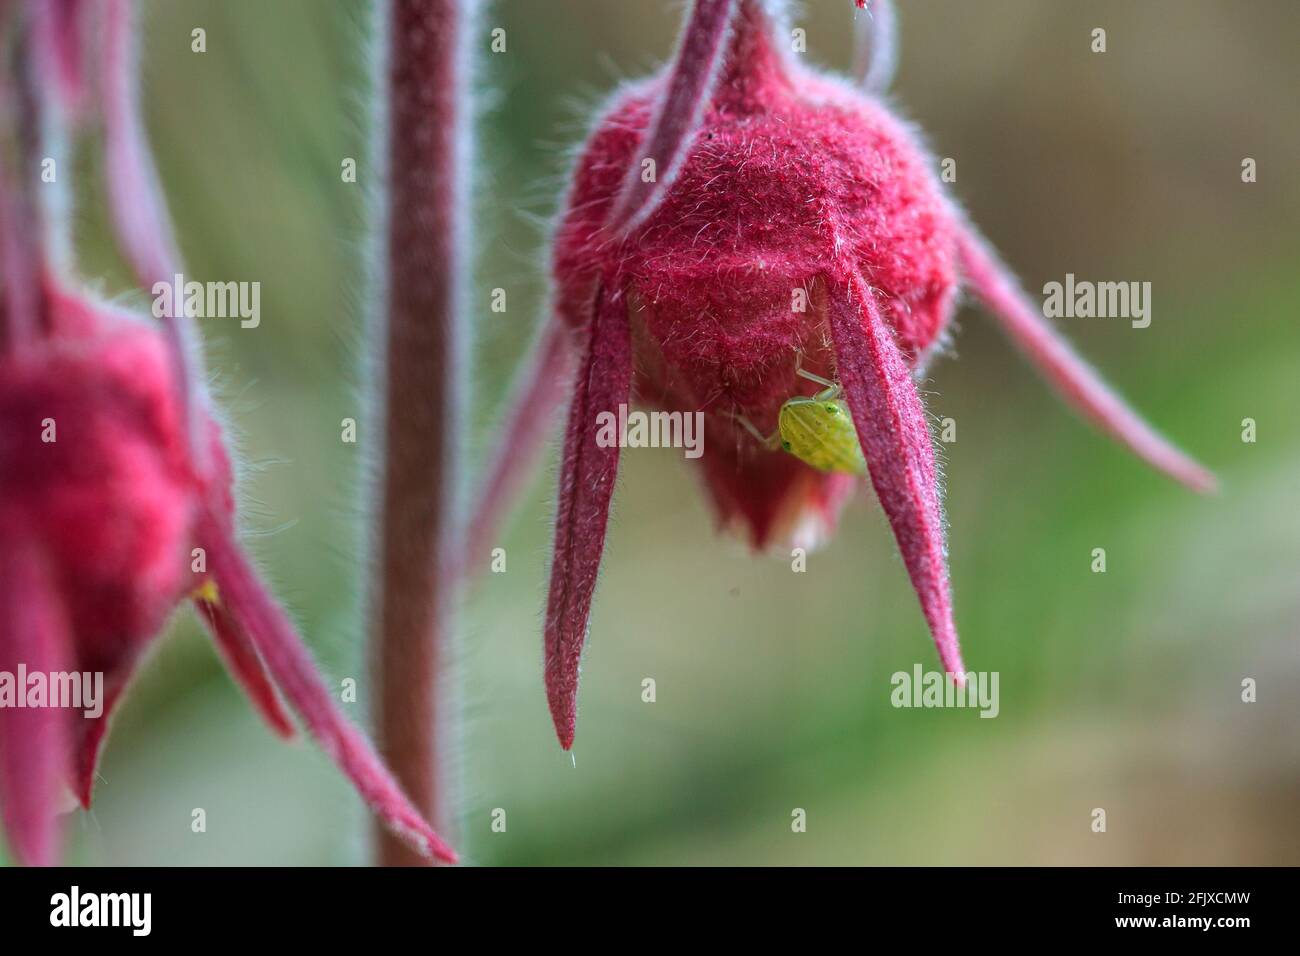 AKA: three-flowered avens, or old man's whiskers  Walking Iron County Park  April 24th 2021 Stock Photo